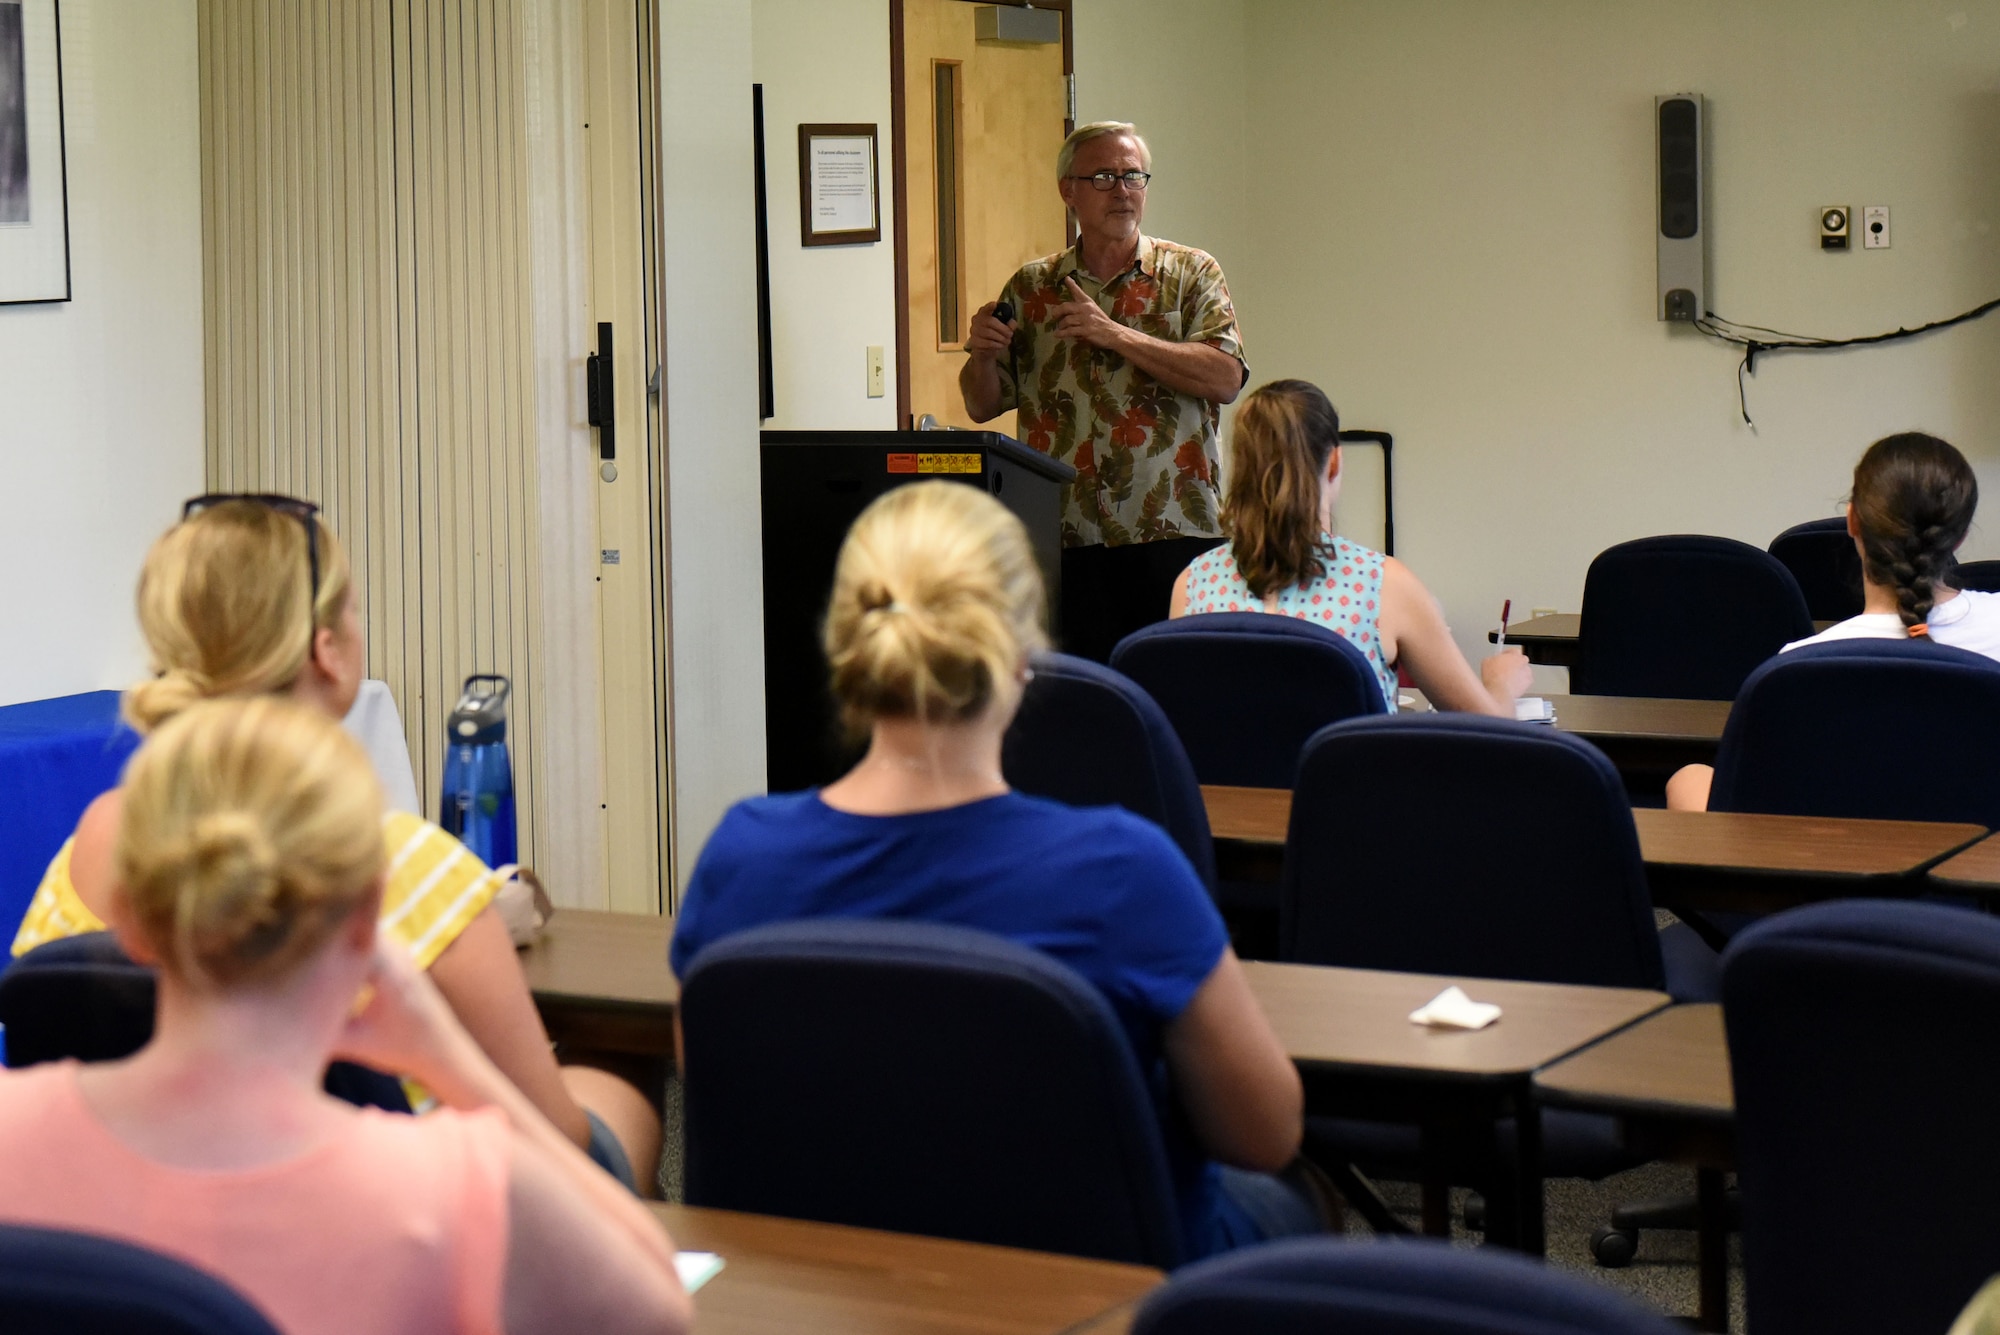 Andrew Colville, 4th Force Support Squadron casualty assistance representative, briefs Key Spouses and Key Spouse Mentors during a crisis training course, June 15, 2017, at the Airman and Family Readiness Center at Seymour Johnson Air Force Base, North Carolina. Key Spouses attend training classes throughout the year to stay up to date with current procedures and the most recent information. (U.S. Air Force photo by Airman 1st Class Victoria Boyton)